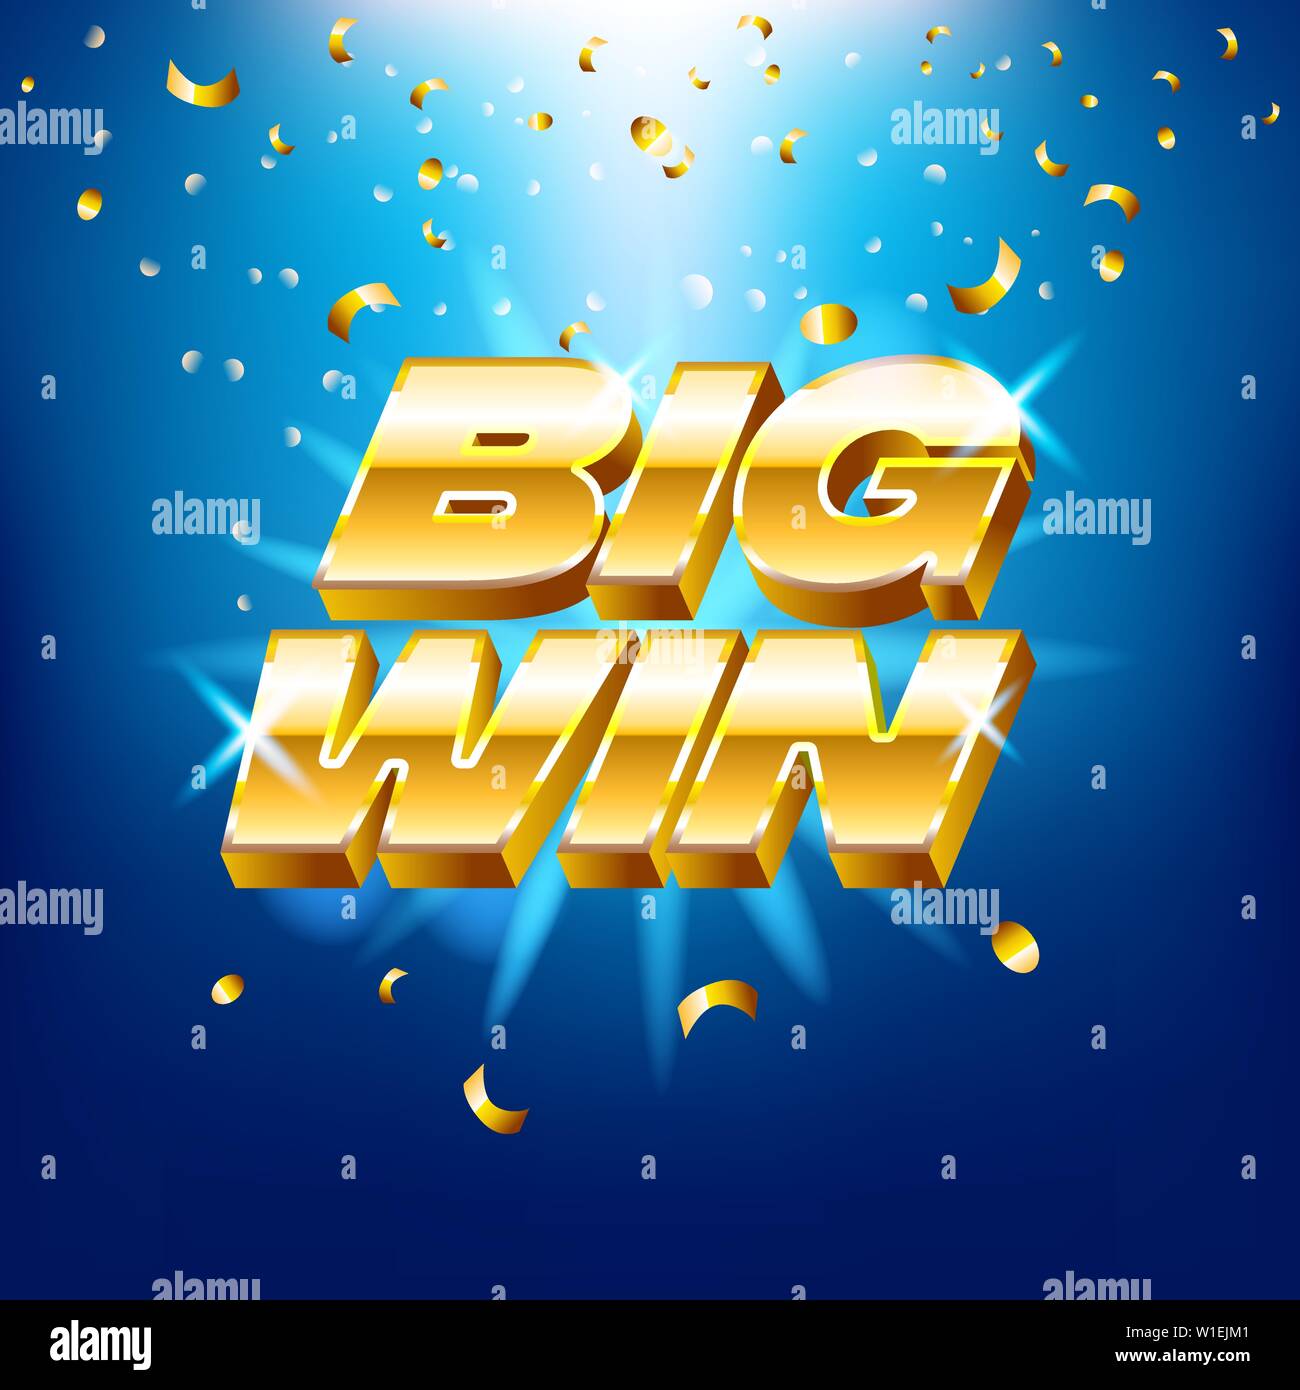 Big win banner with gold text for casino machines, gambling games, success, prize, lucky winner, vector illustration. Stock Vector